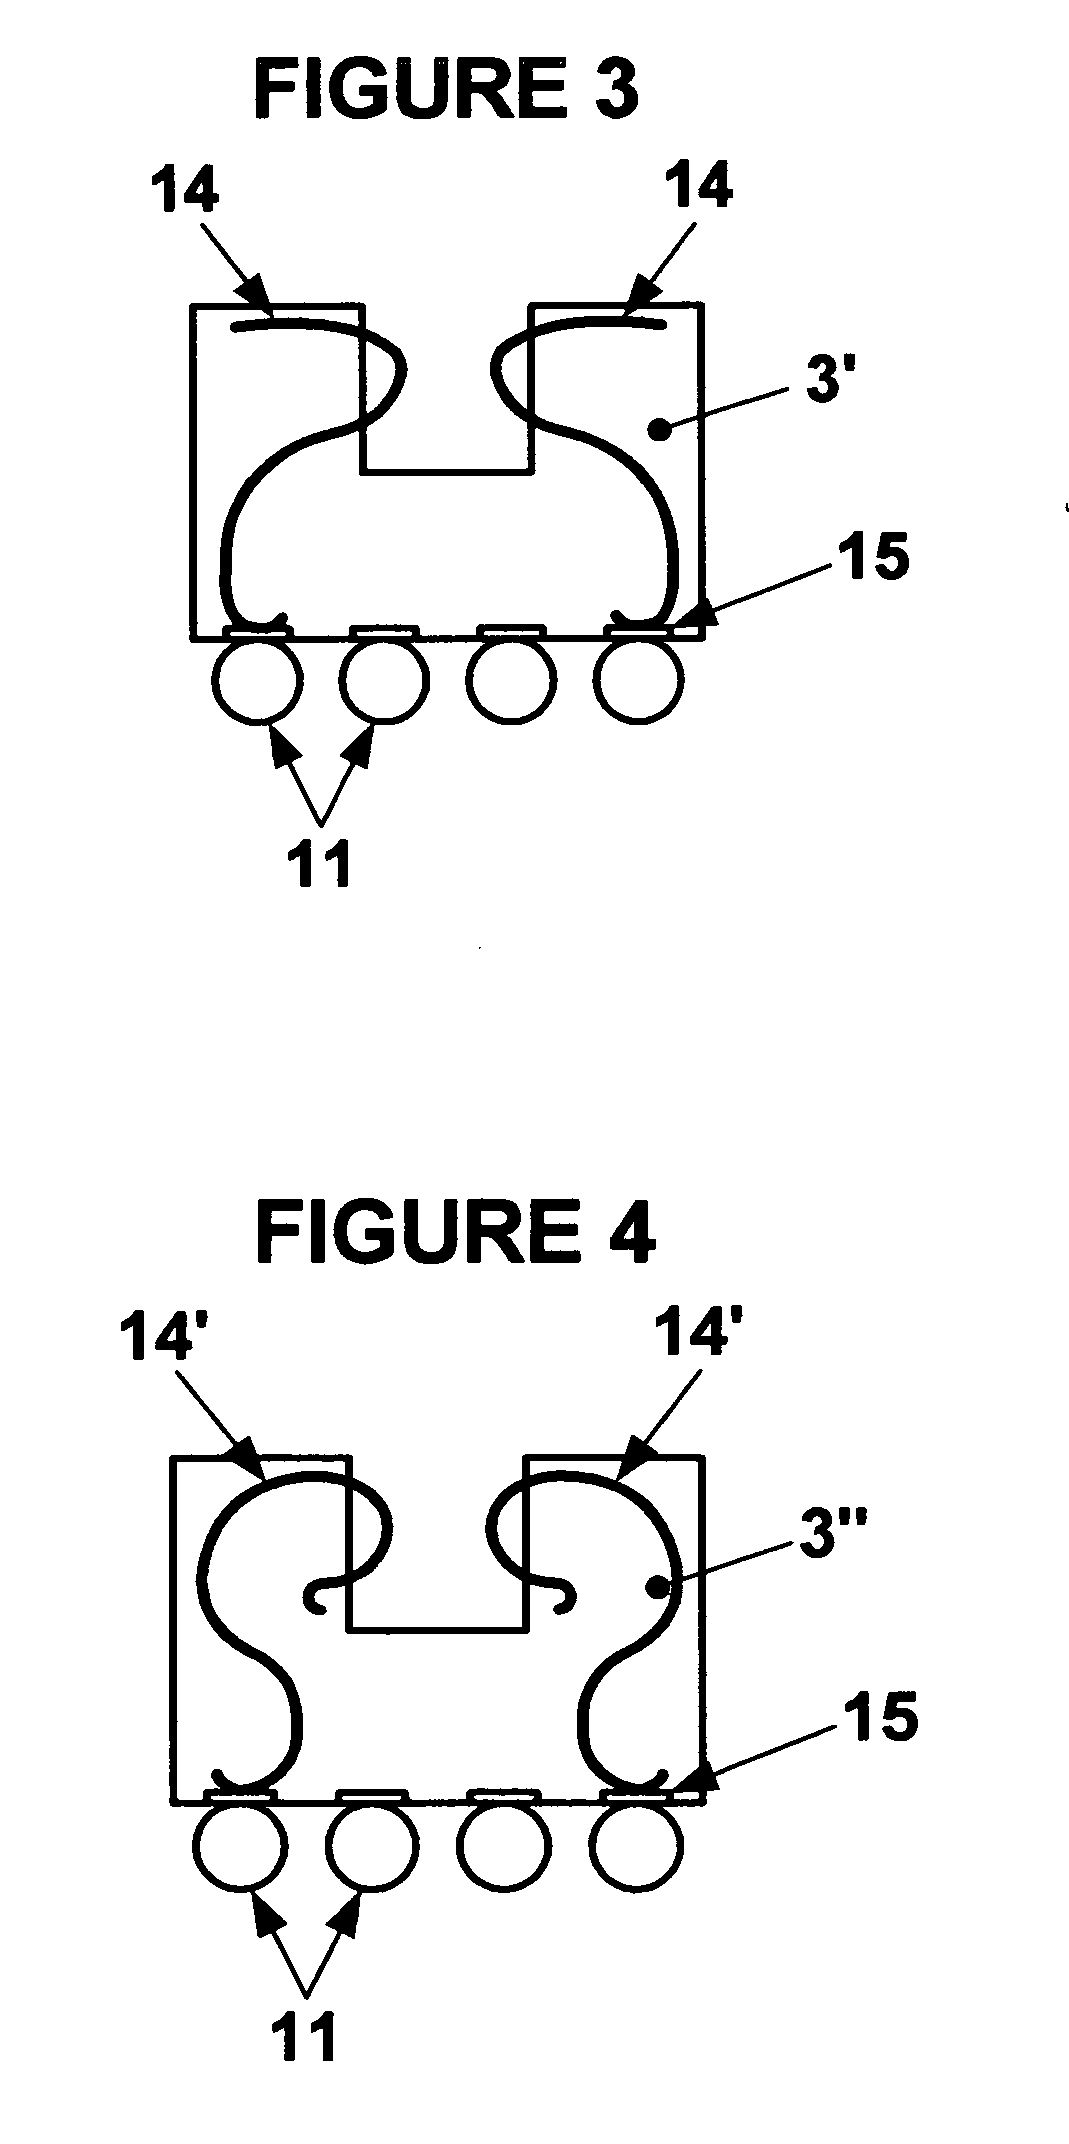 Edge card connector having solder balls and related methods